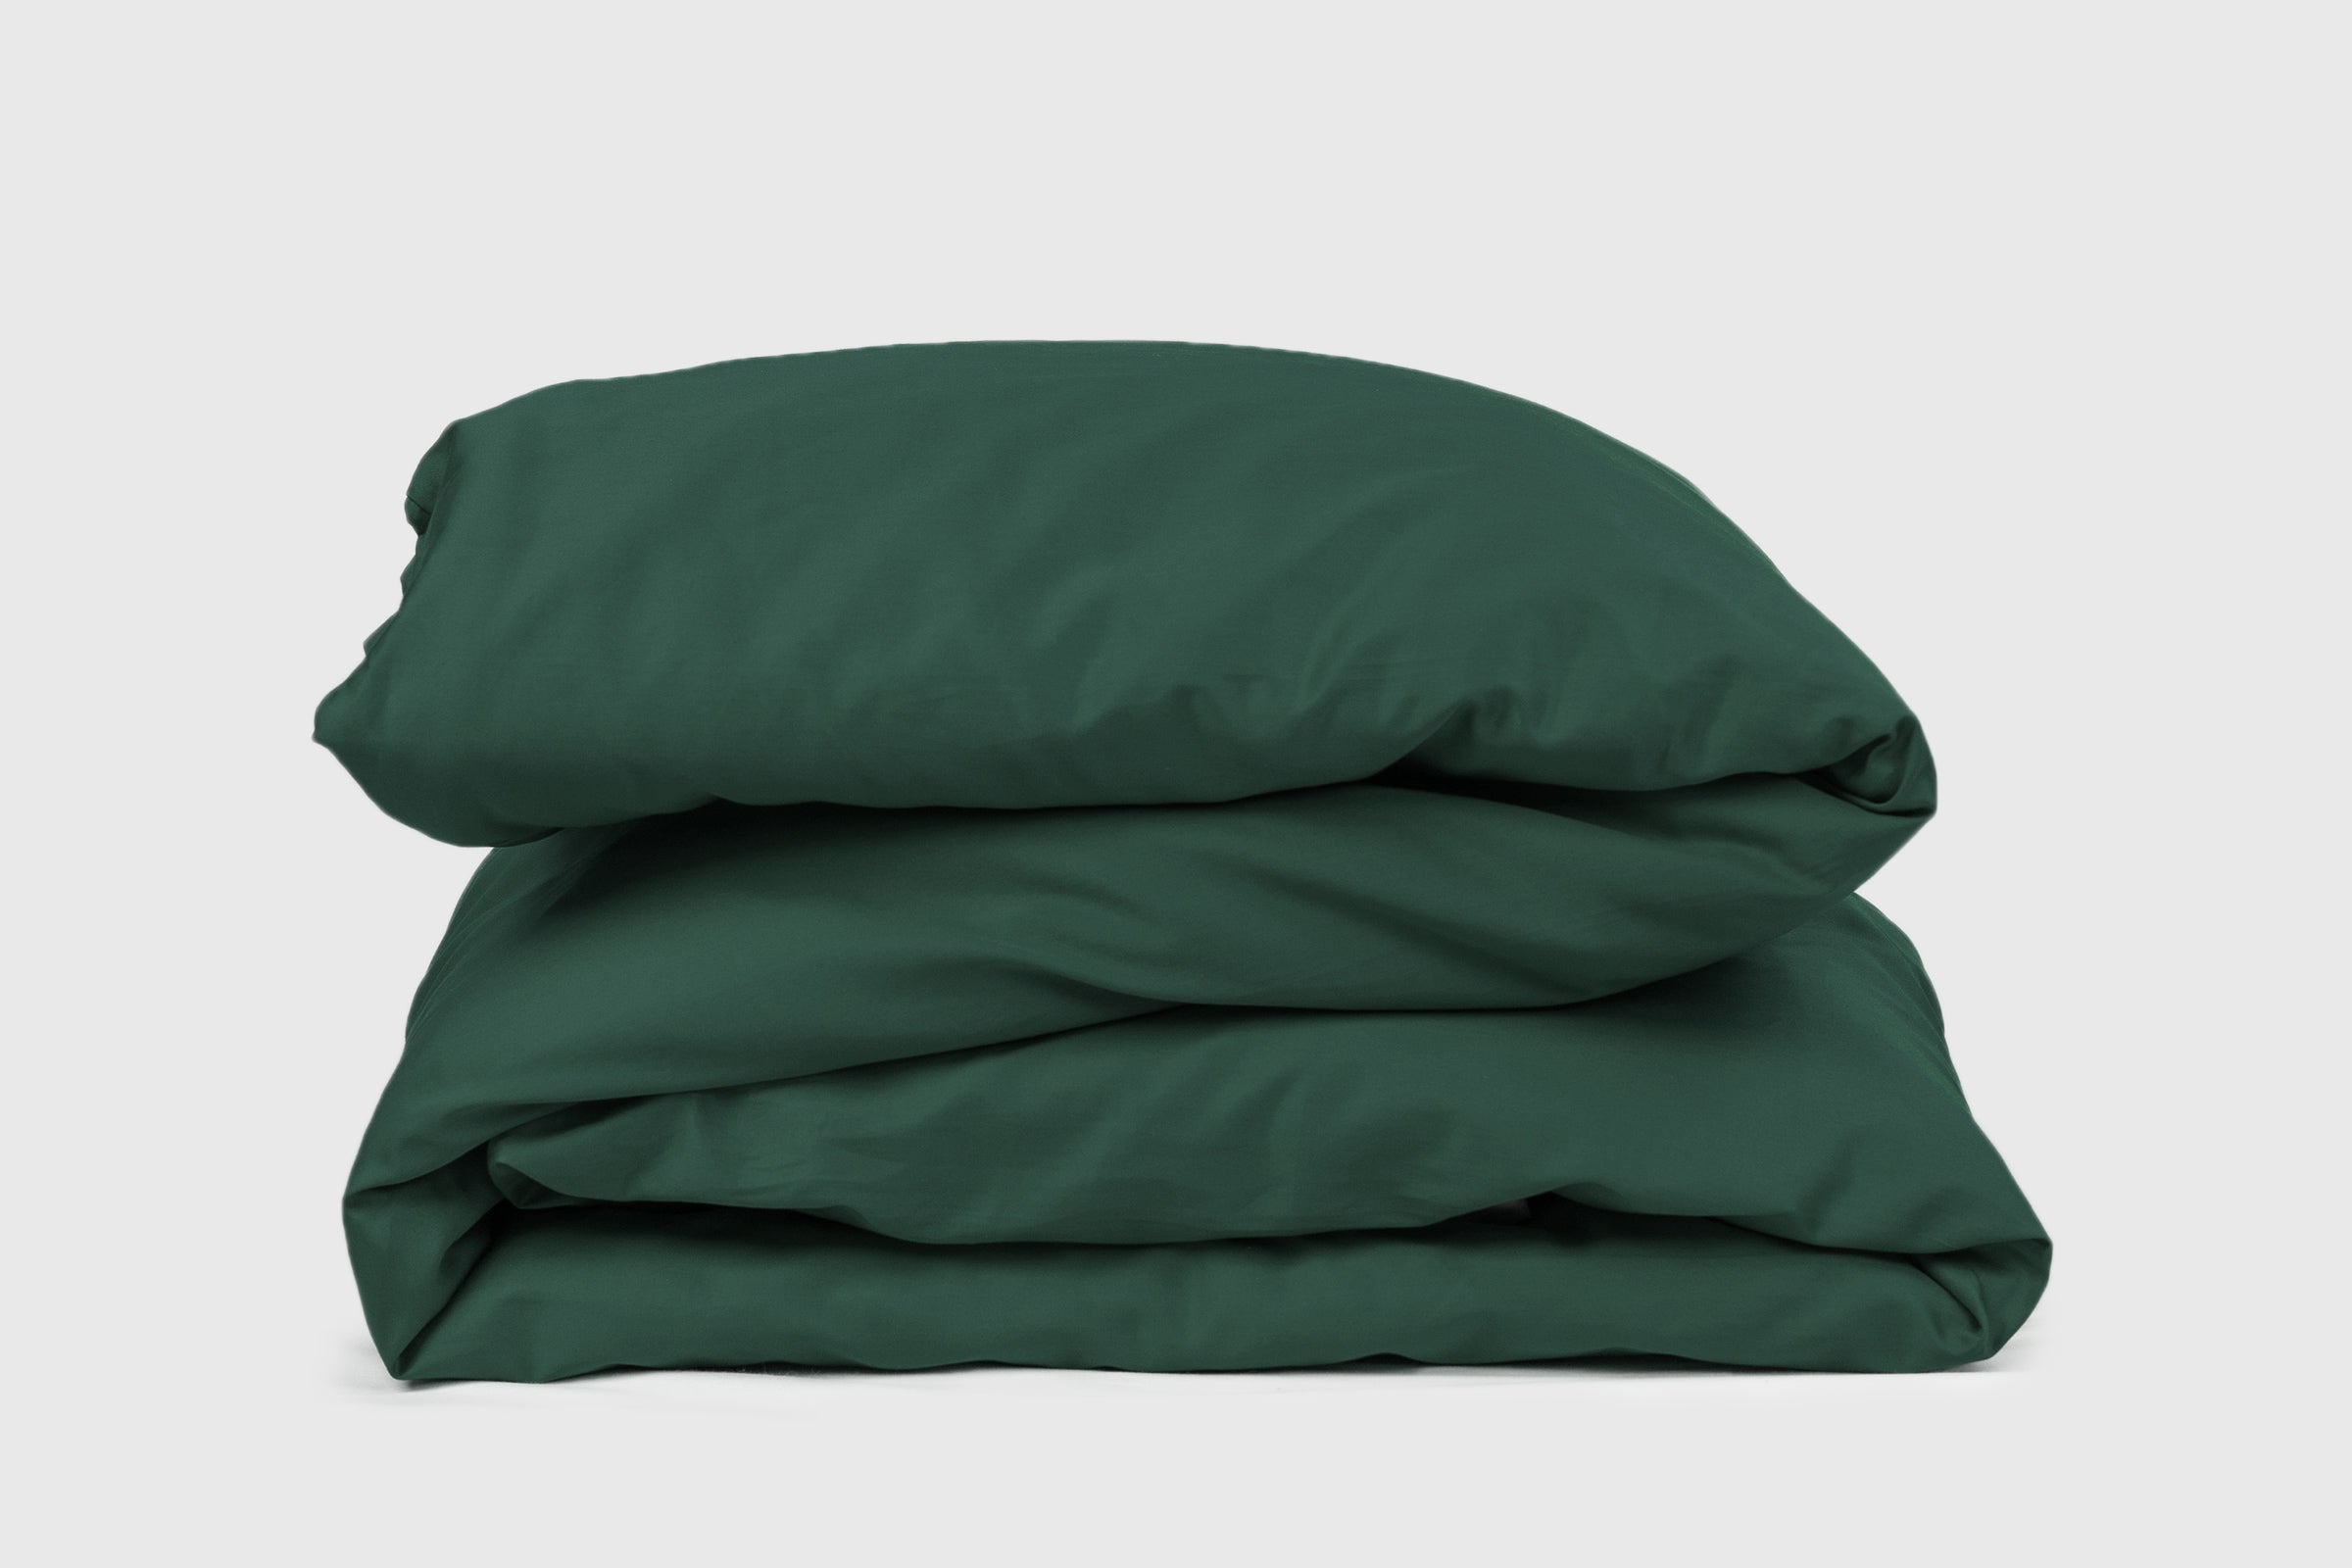 classic-forest-duvet-cover-product-shot-by-sojao.jpg